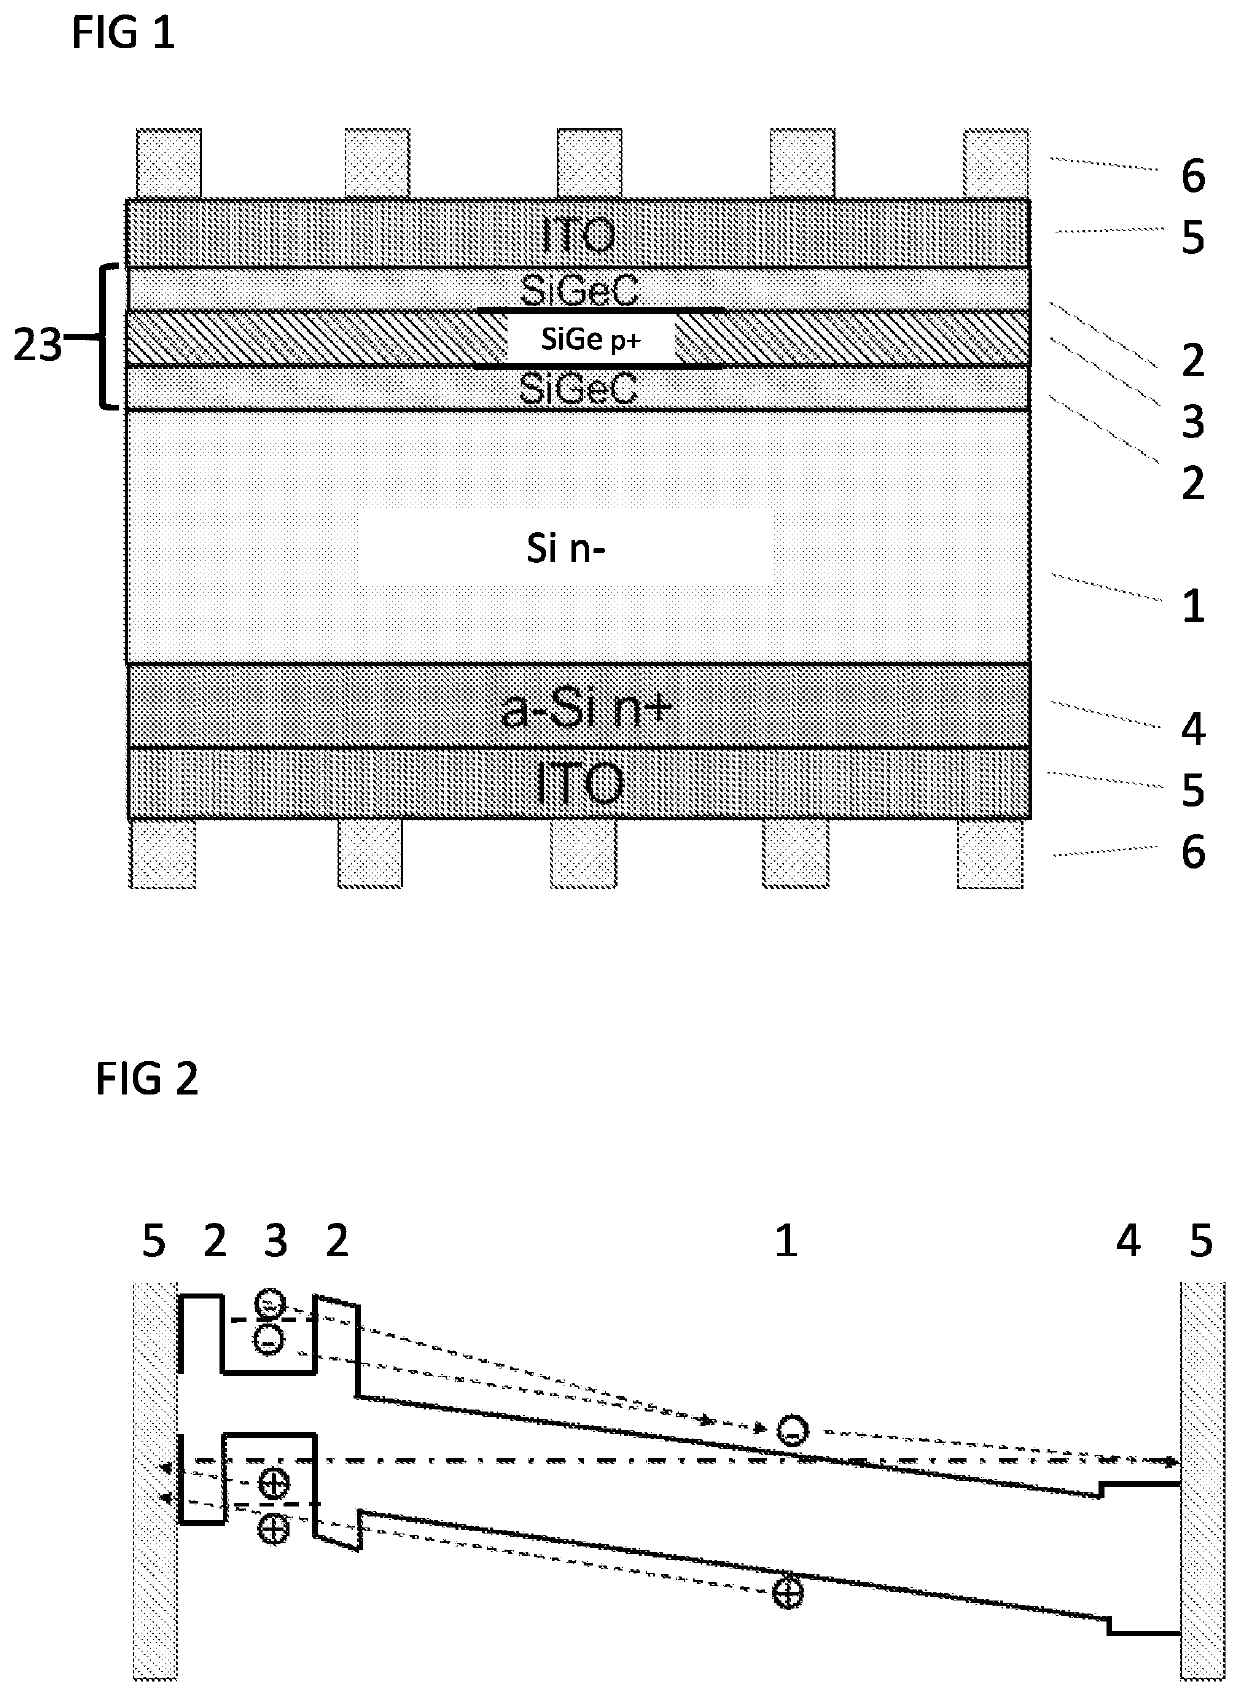 Semiconductor Component Having a Highly Doped Quantum Structure Emitter